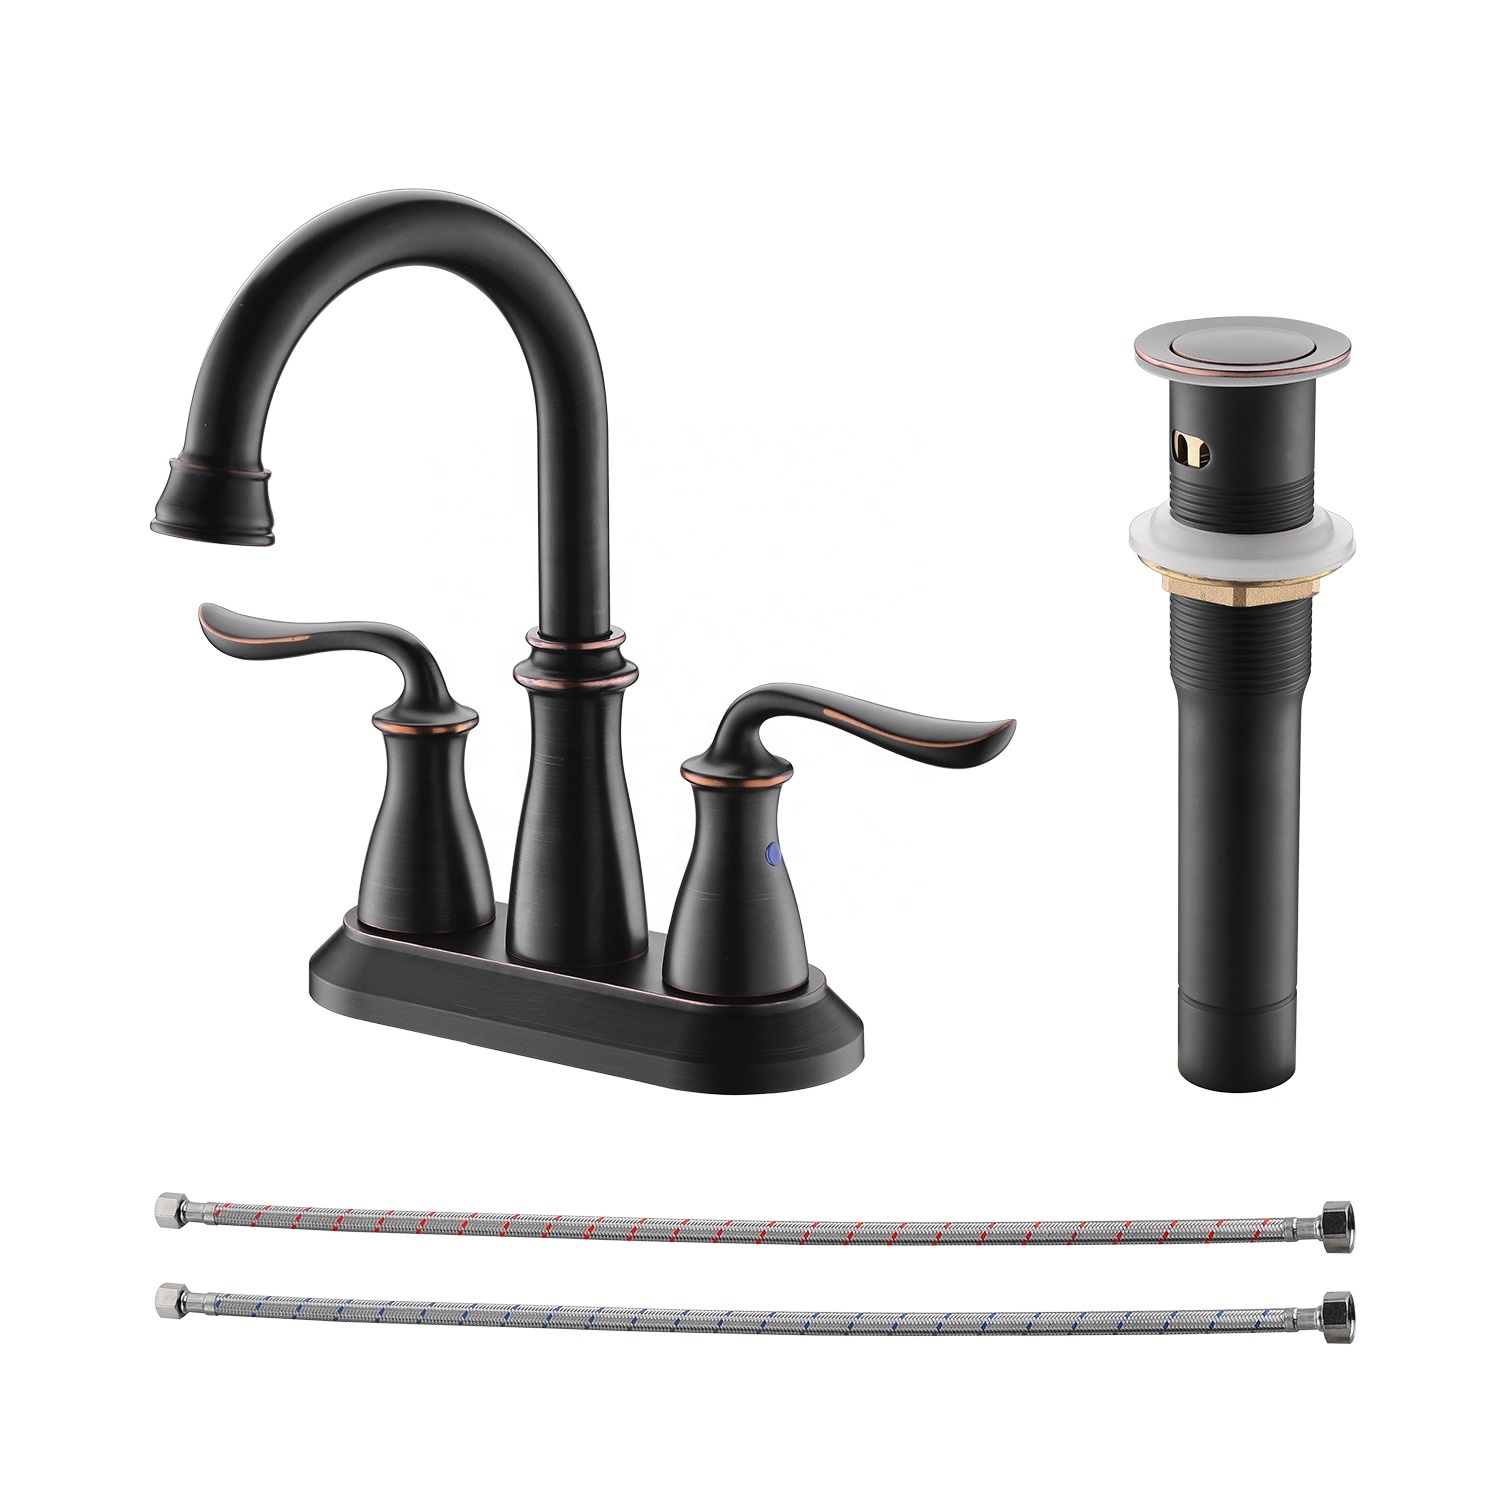 Hot Sale American Classic Water Mixer Three Holes Dural Handles Tap Basin Faucet High Quality